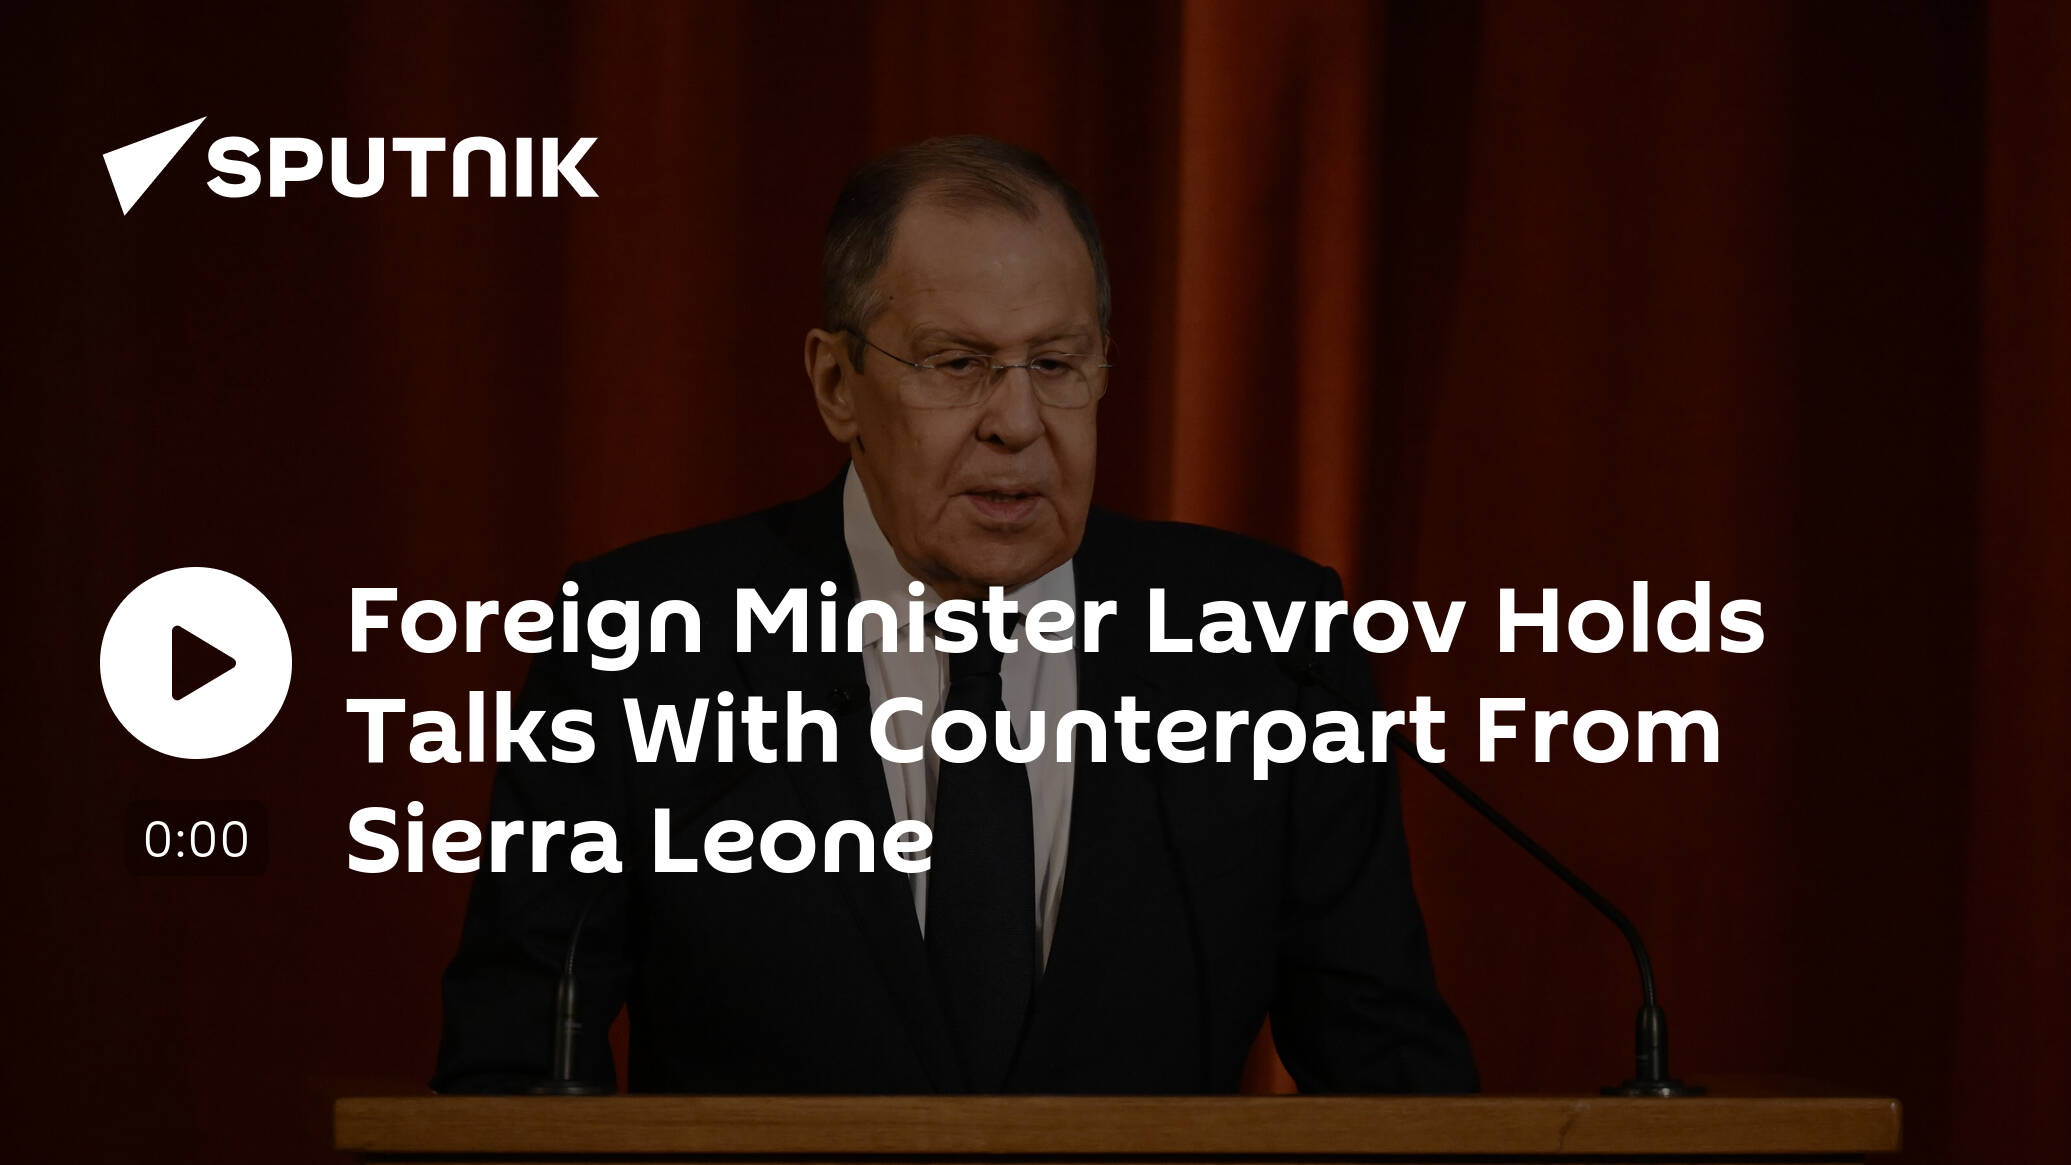 Foreign Minister Lavrov Holds Talks With Counterpart From Sierra Leone [Video]